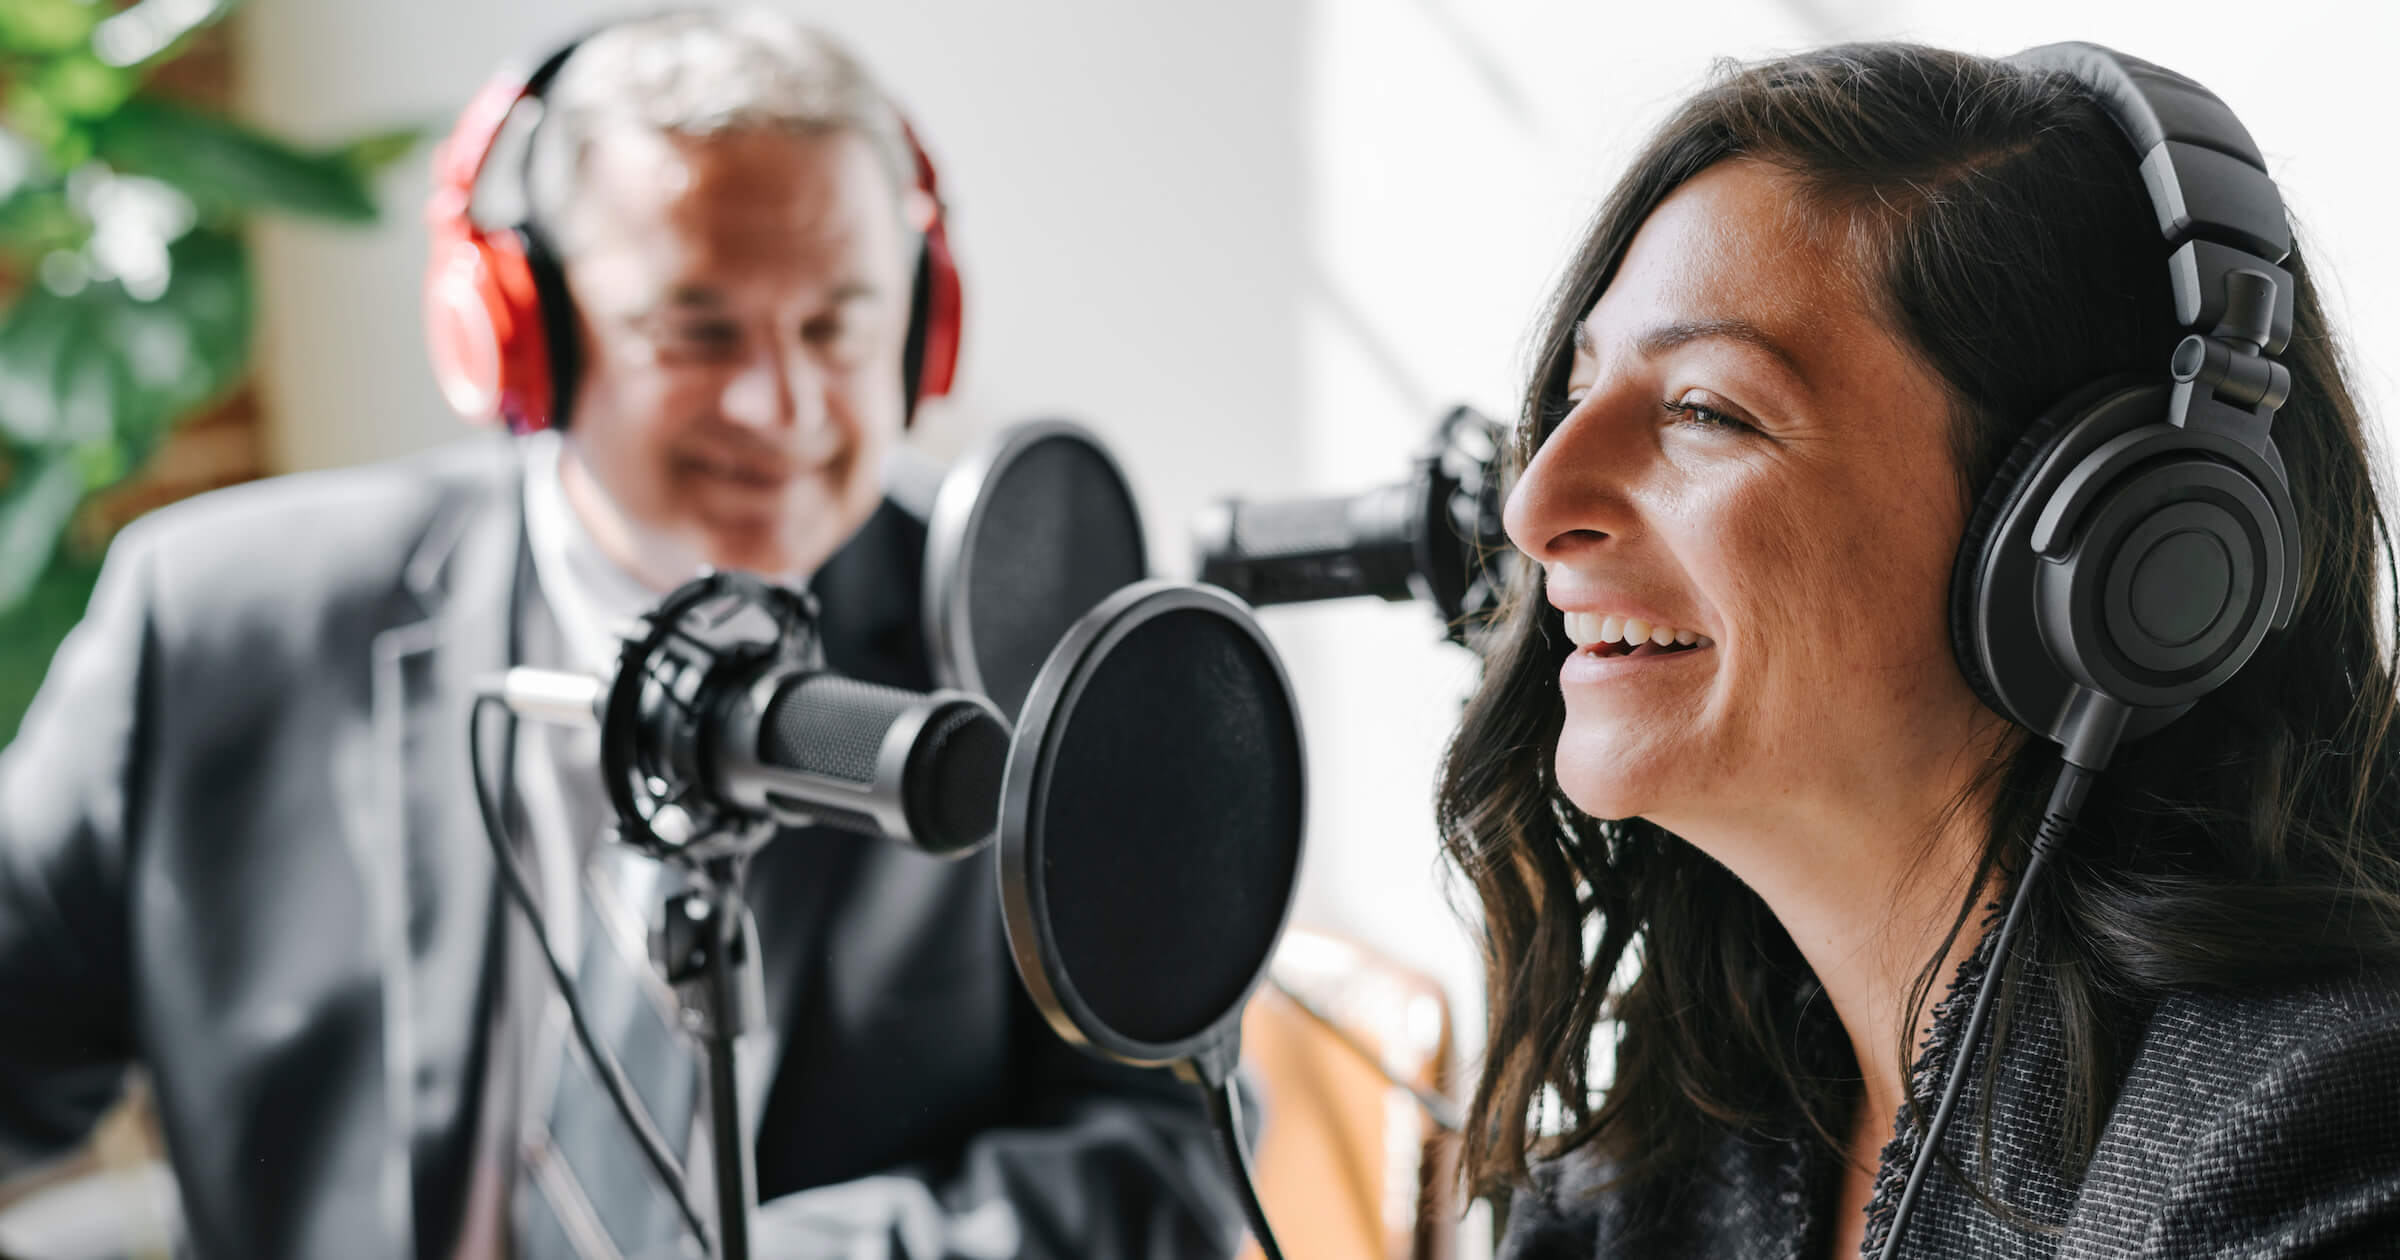  Woman and man talking on mics for a podcast